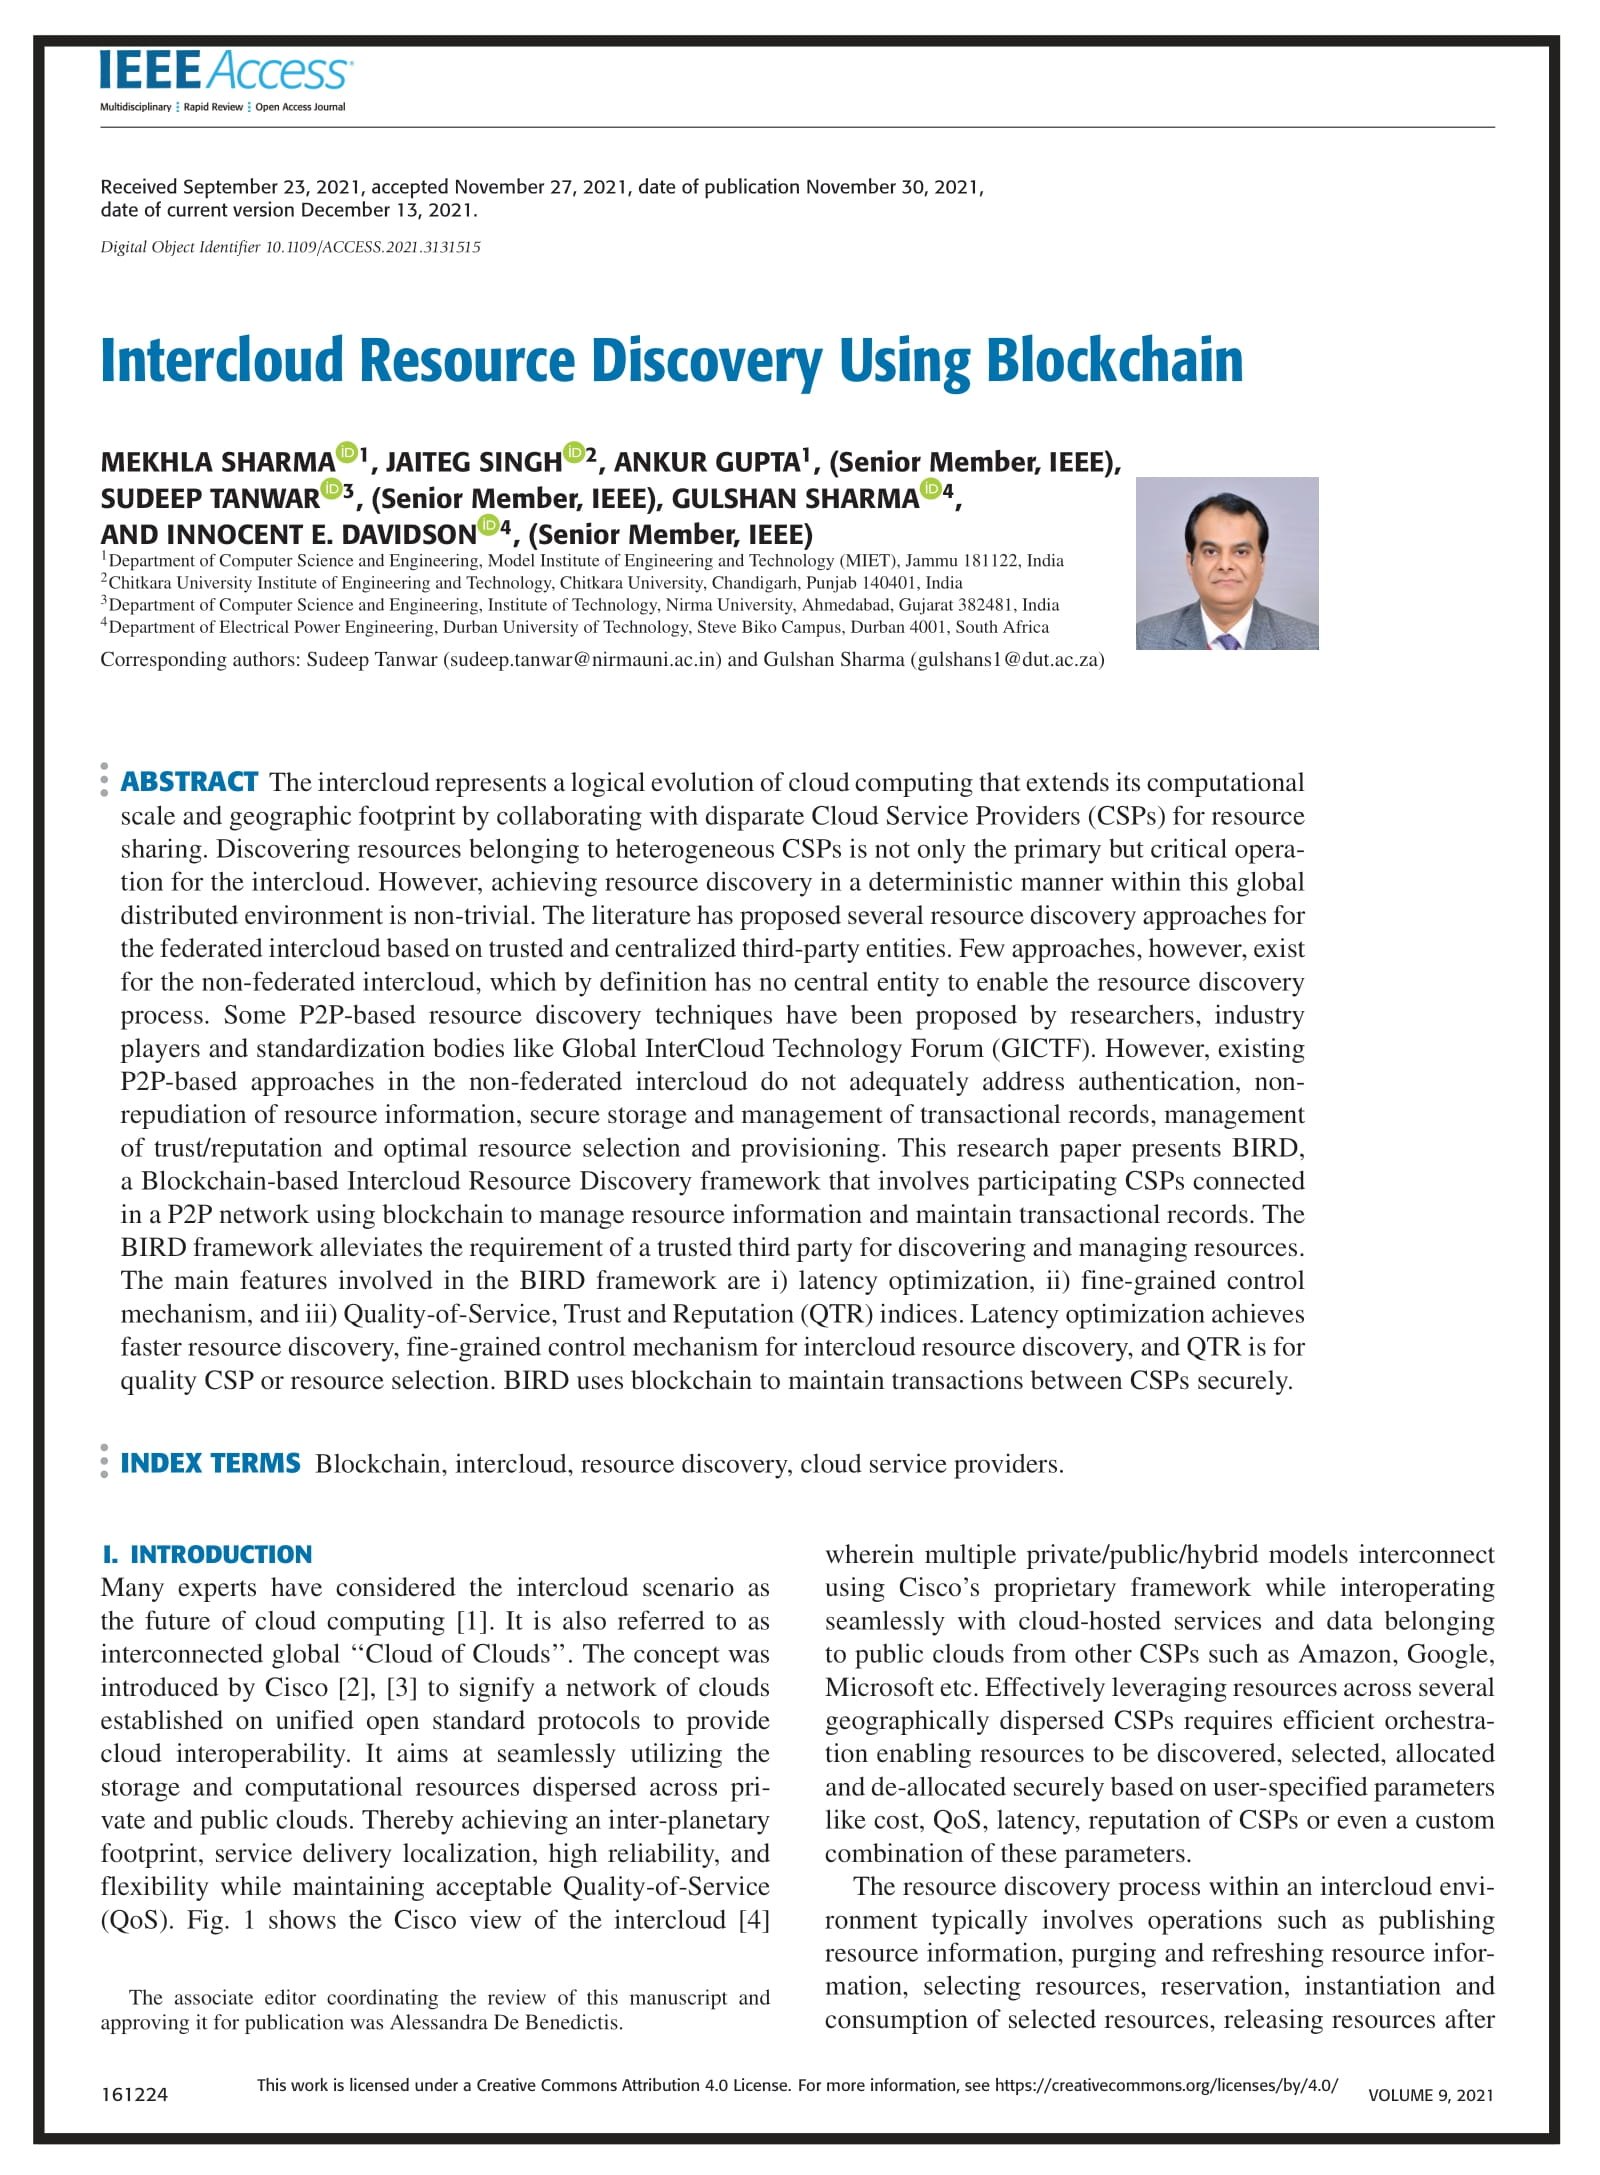 Intercloud Resource Discovery using Blockchain